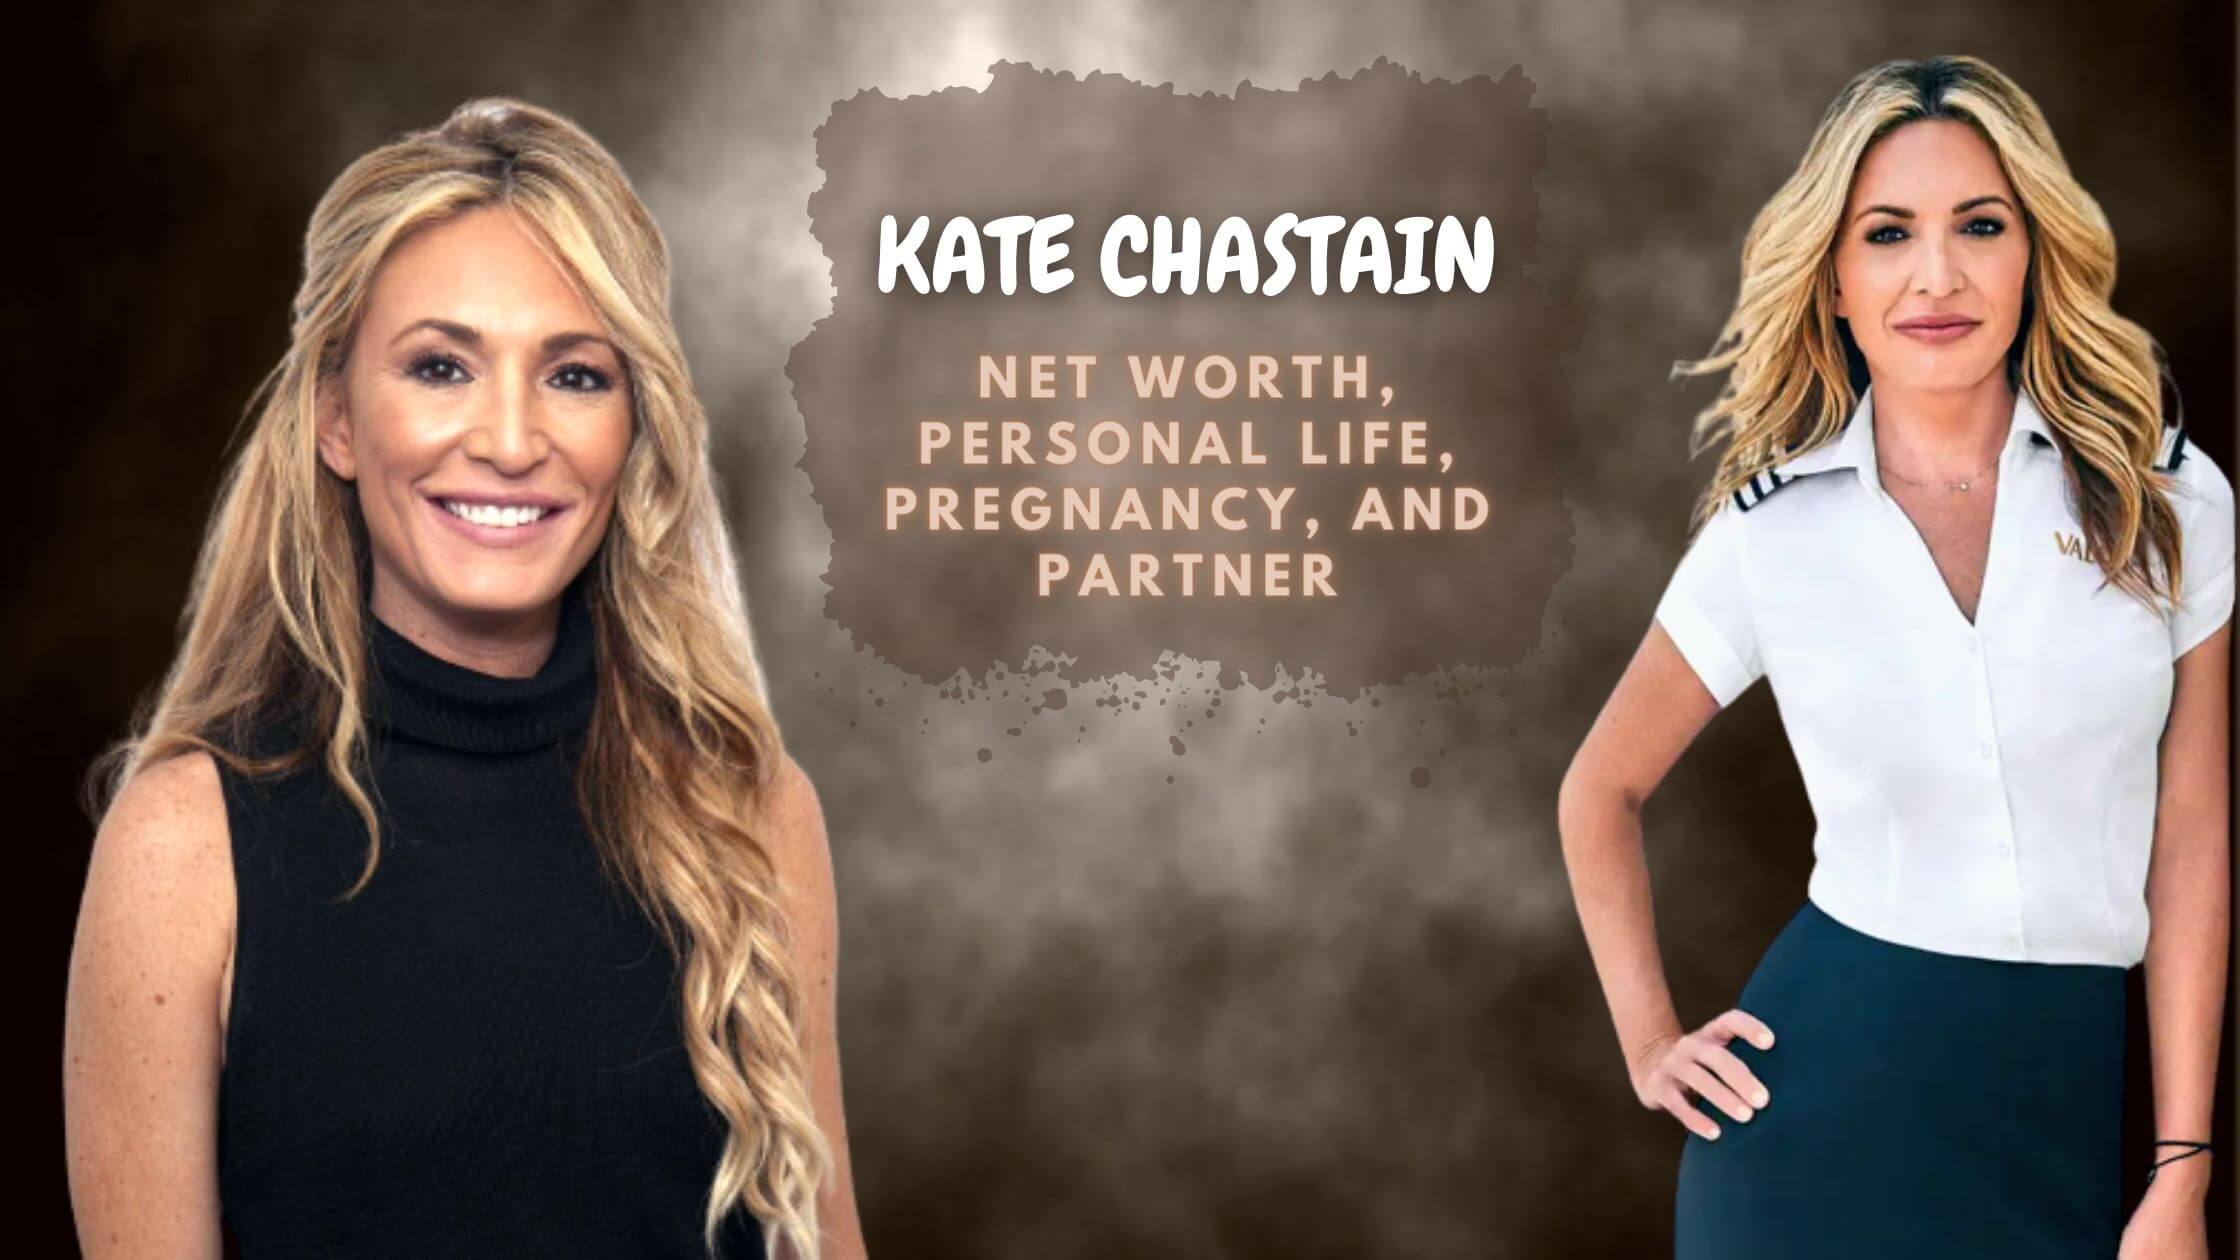 Kate Chastain Net Worth, Personal life, Pregnancy, And Partner